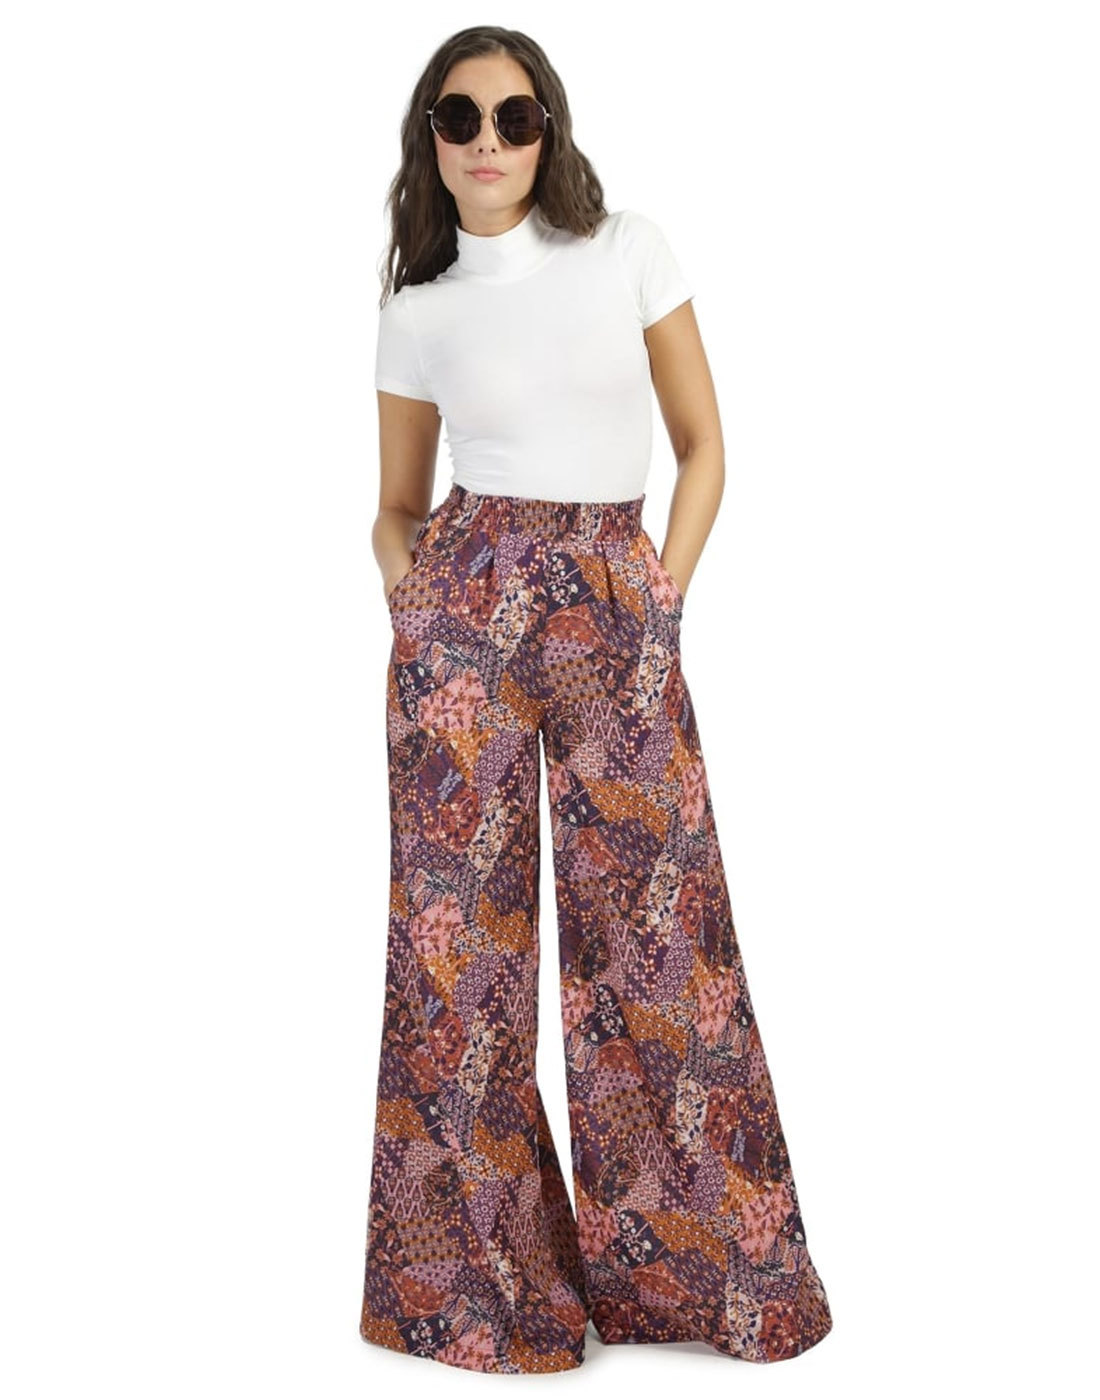 BRIGHT & BEAUTIFUL Lucy Folk Patchwork Trousers